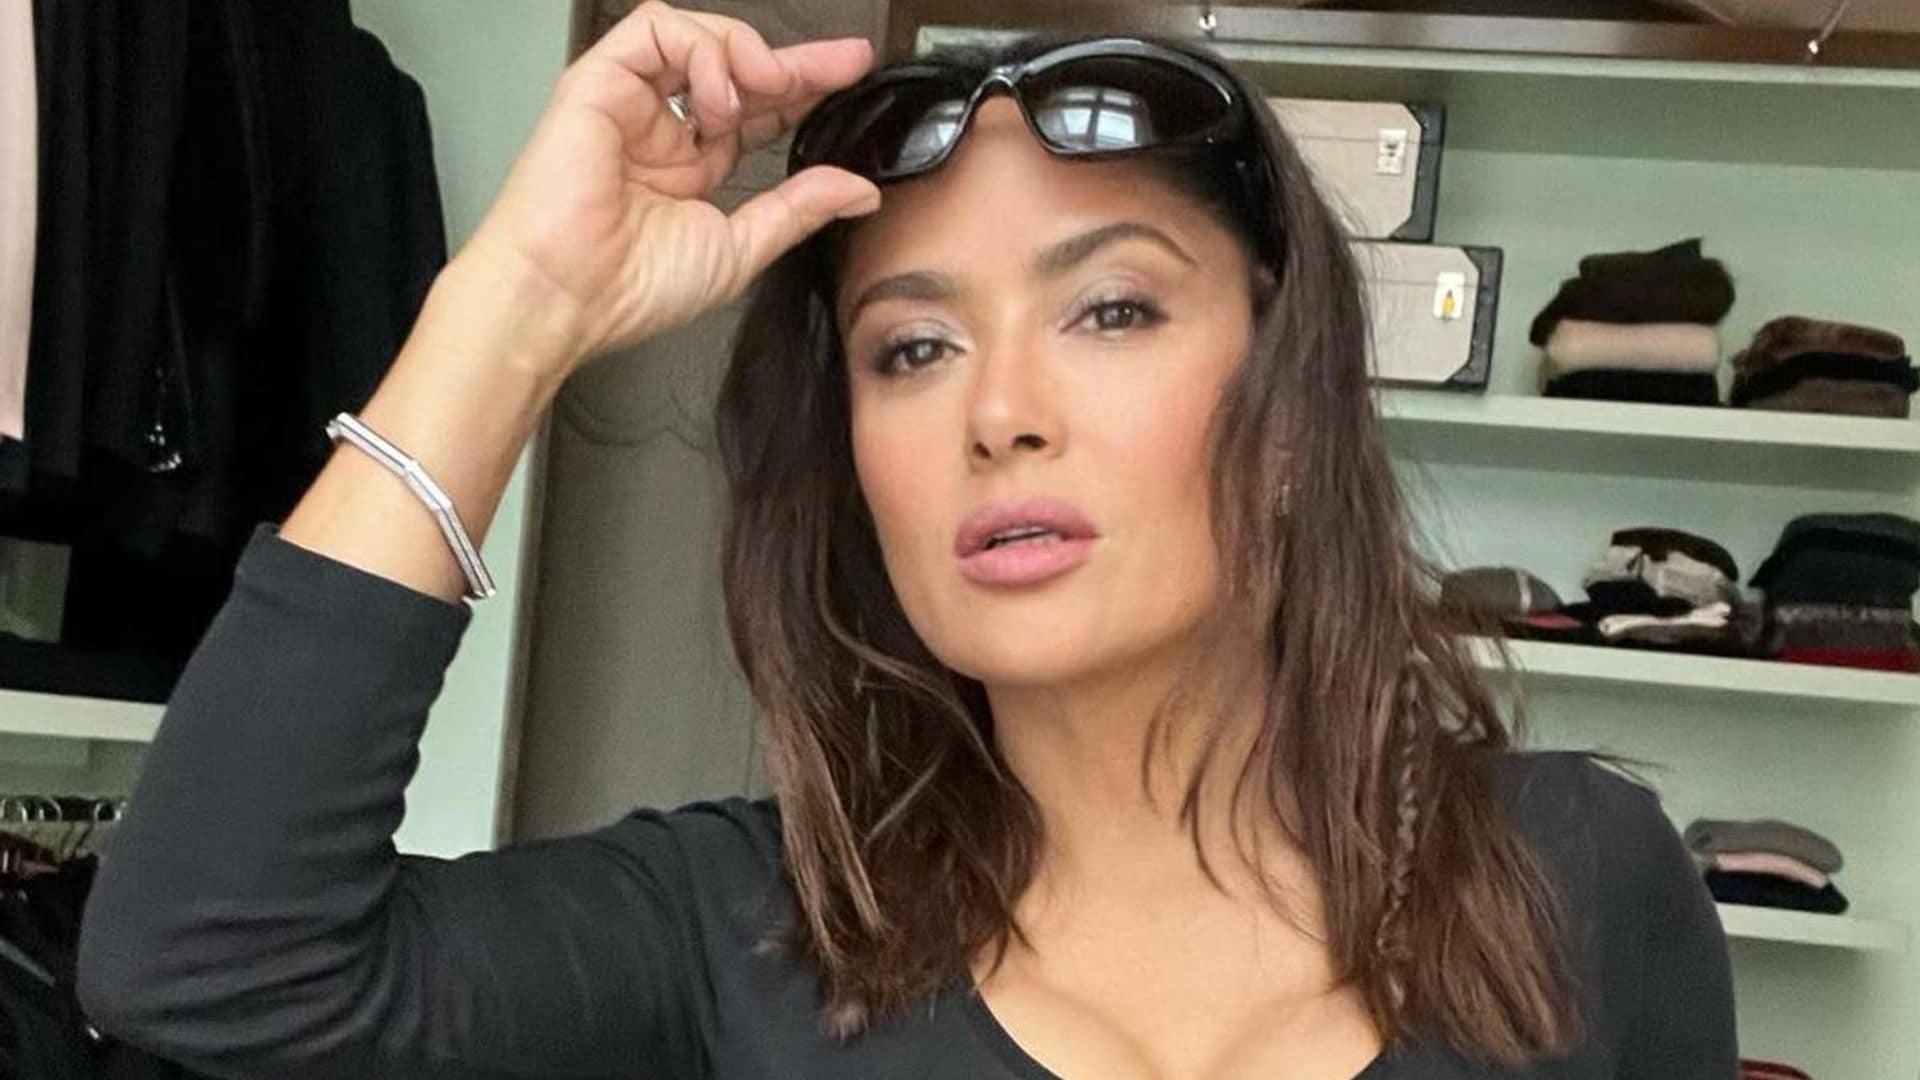 Salma Hayek has fans drooling over her new stunning photo